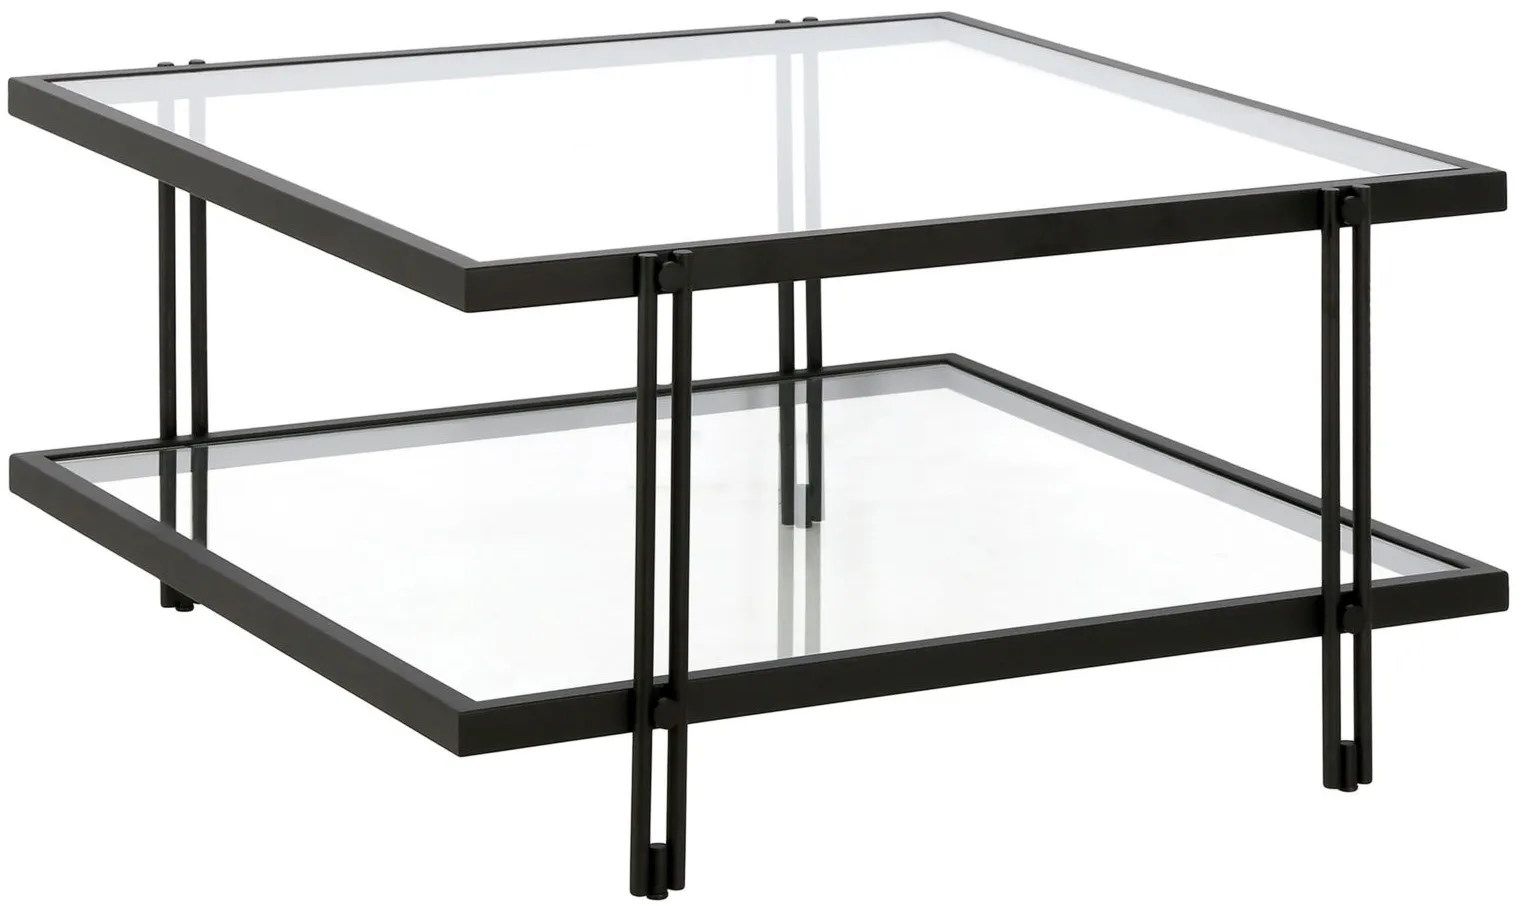 Driscoll Square Coffee Table in Blackened Bronze by Hudson & Canal